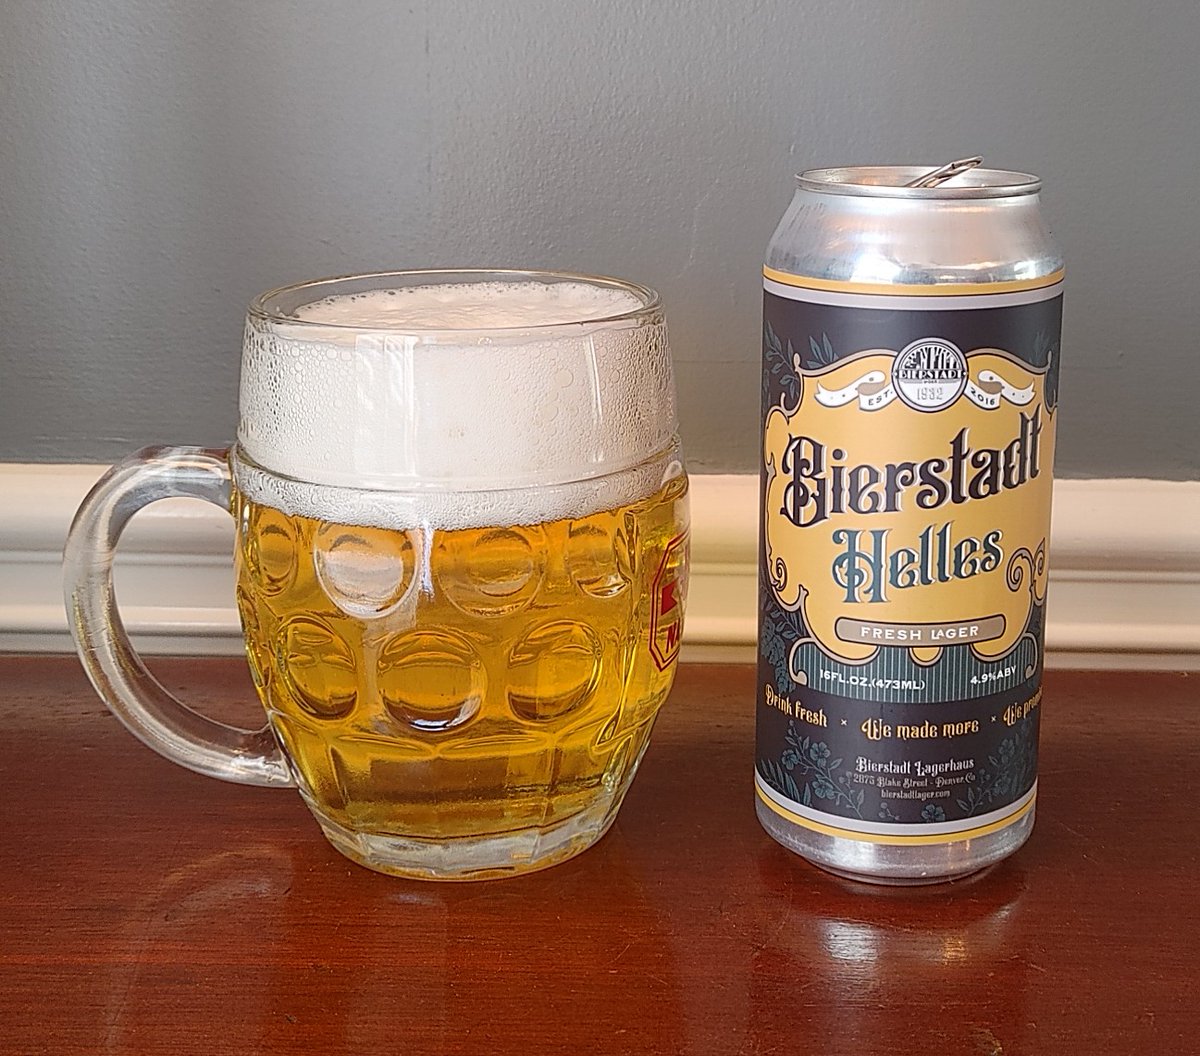 TGIF folks!🍻

Bierstadt Helles
Not too many better than this one. 
Prost!
#craftbeer